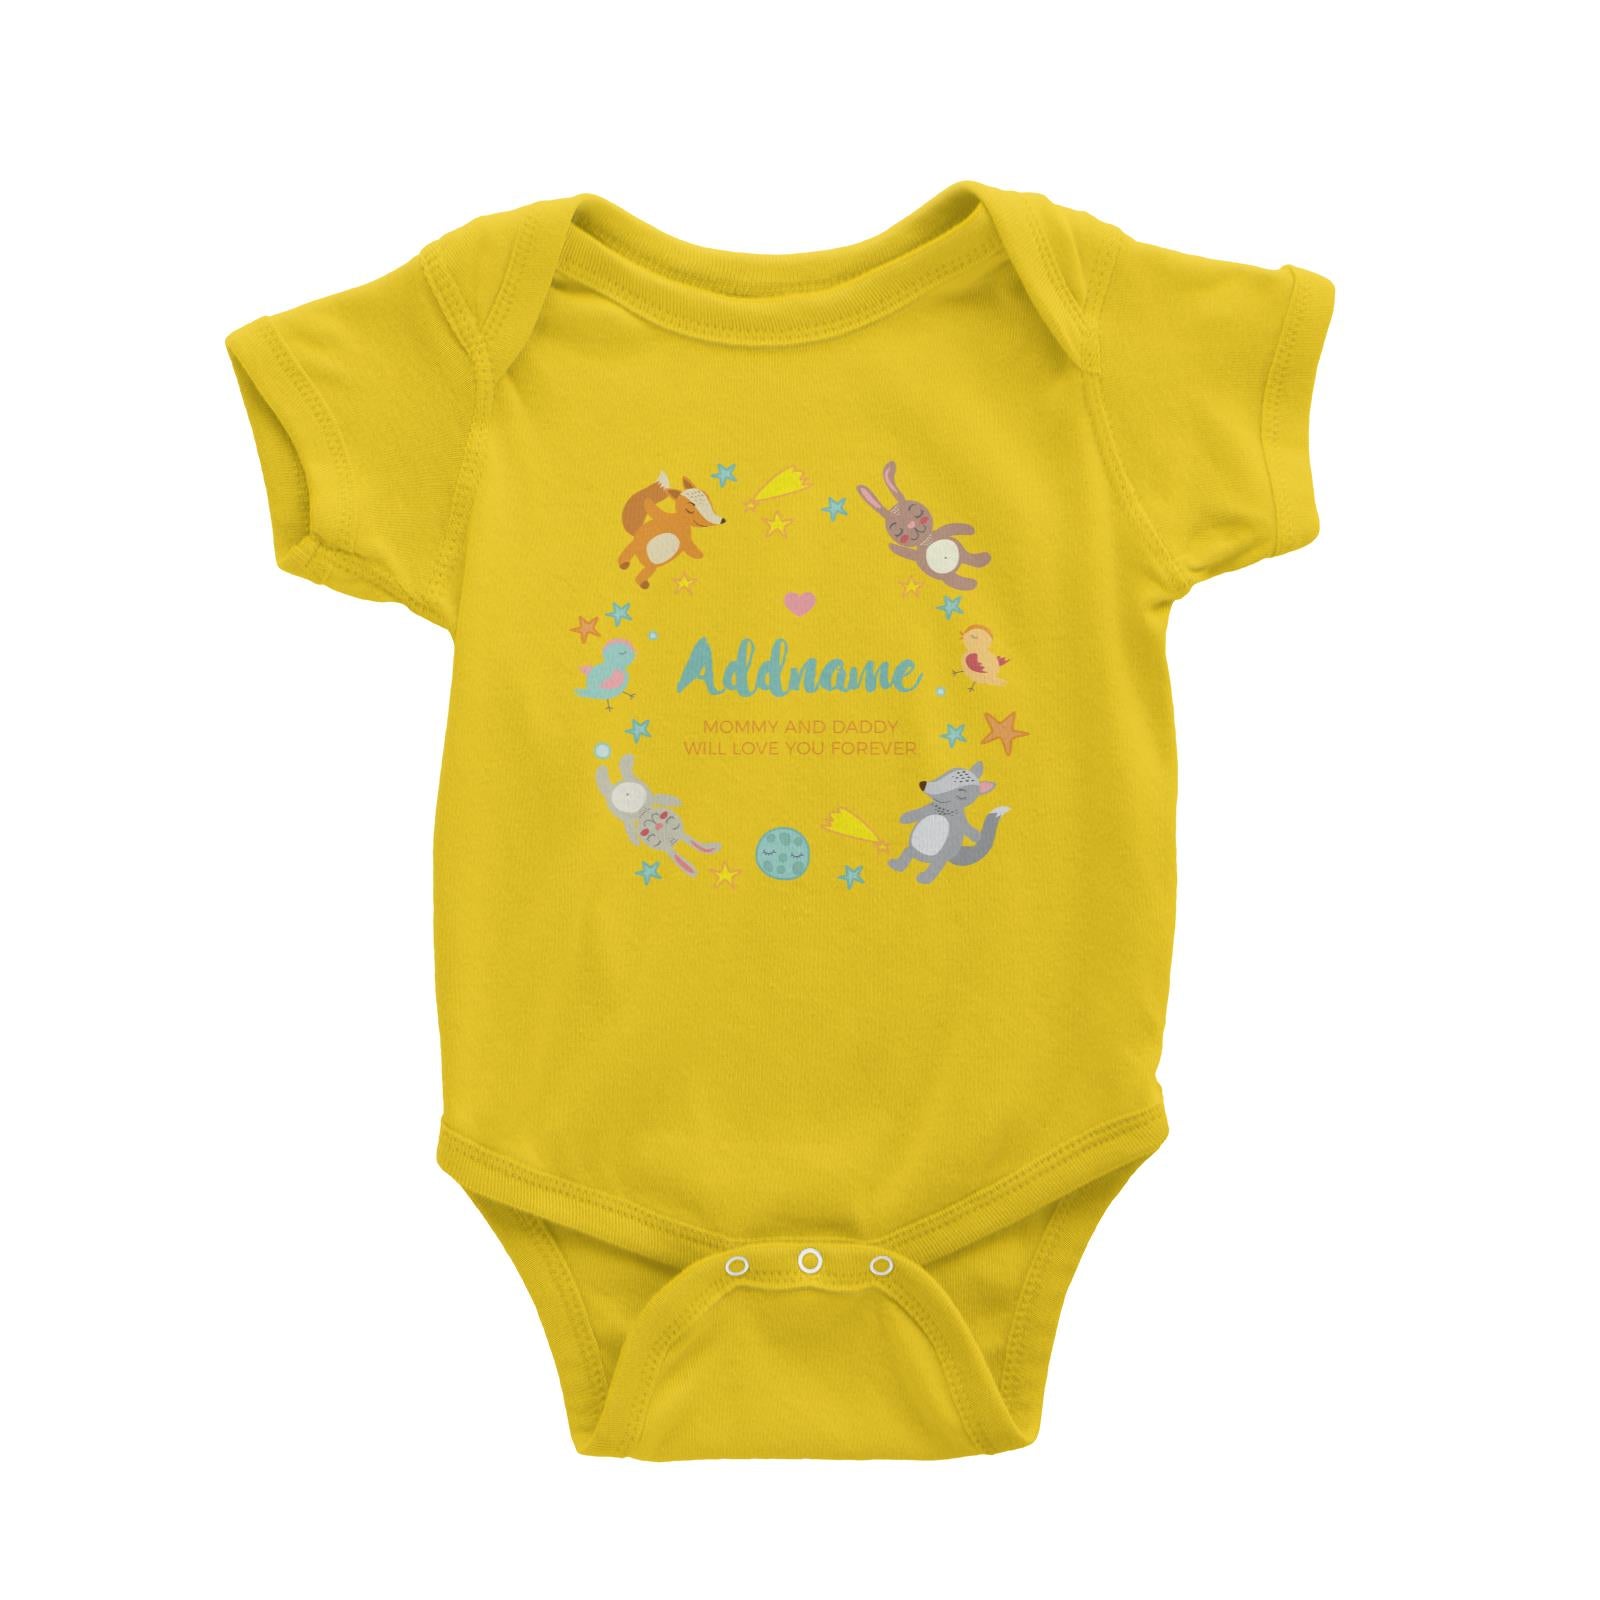 Cute Woodland Animals with Star Elements Personalizable with Name and Text Baby Romper